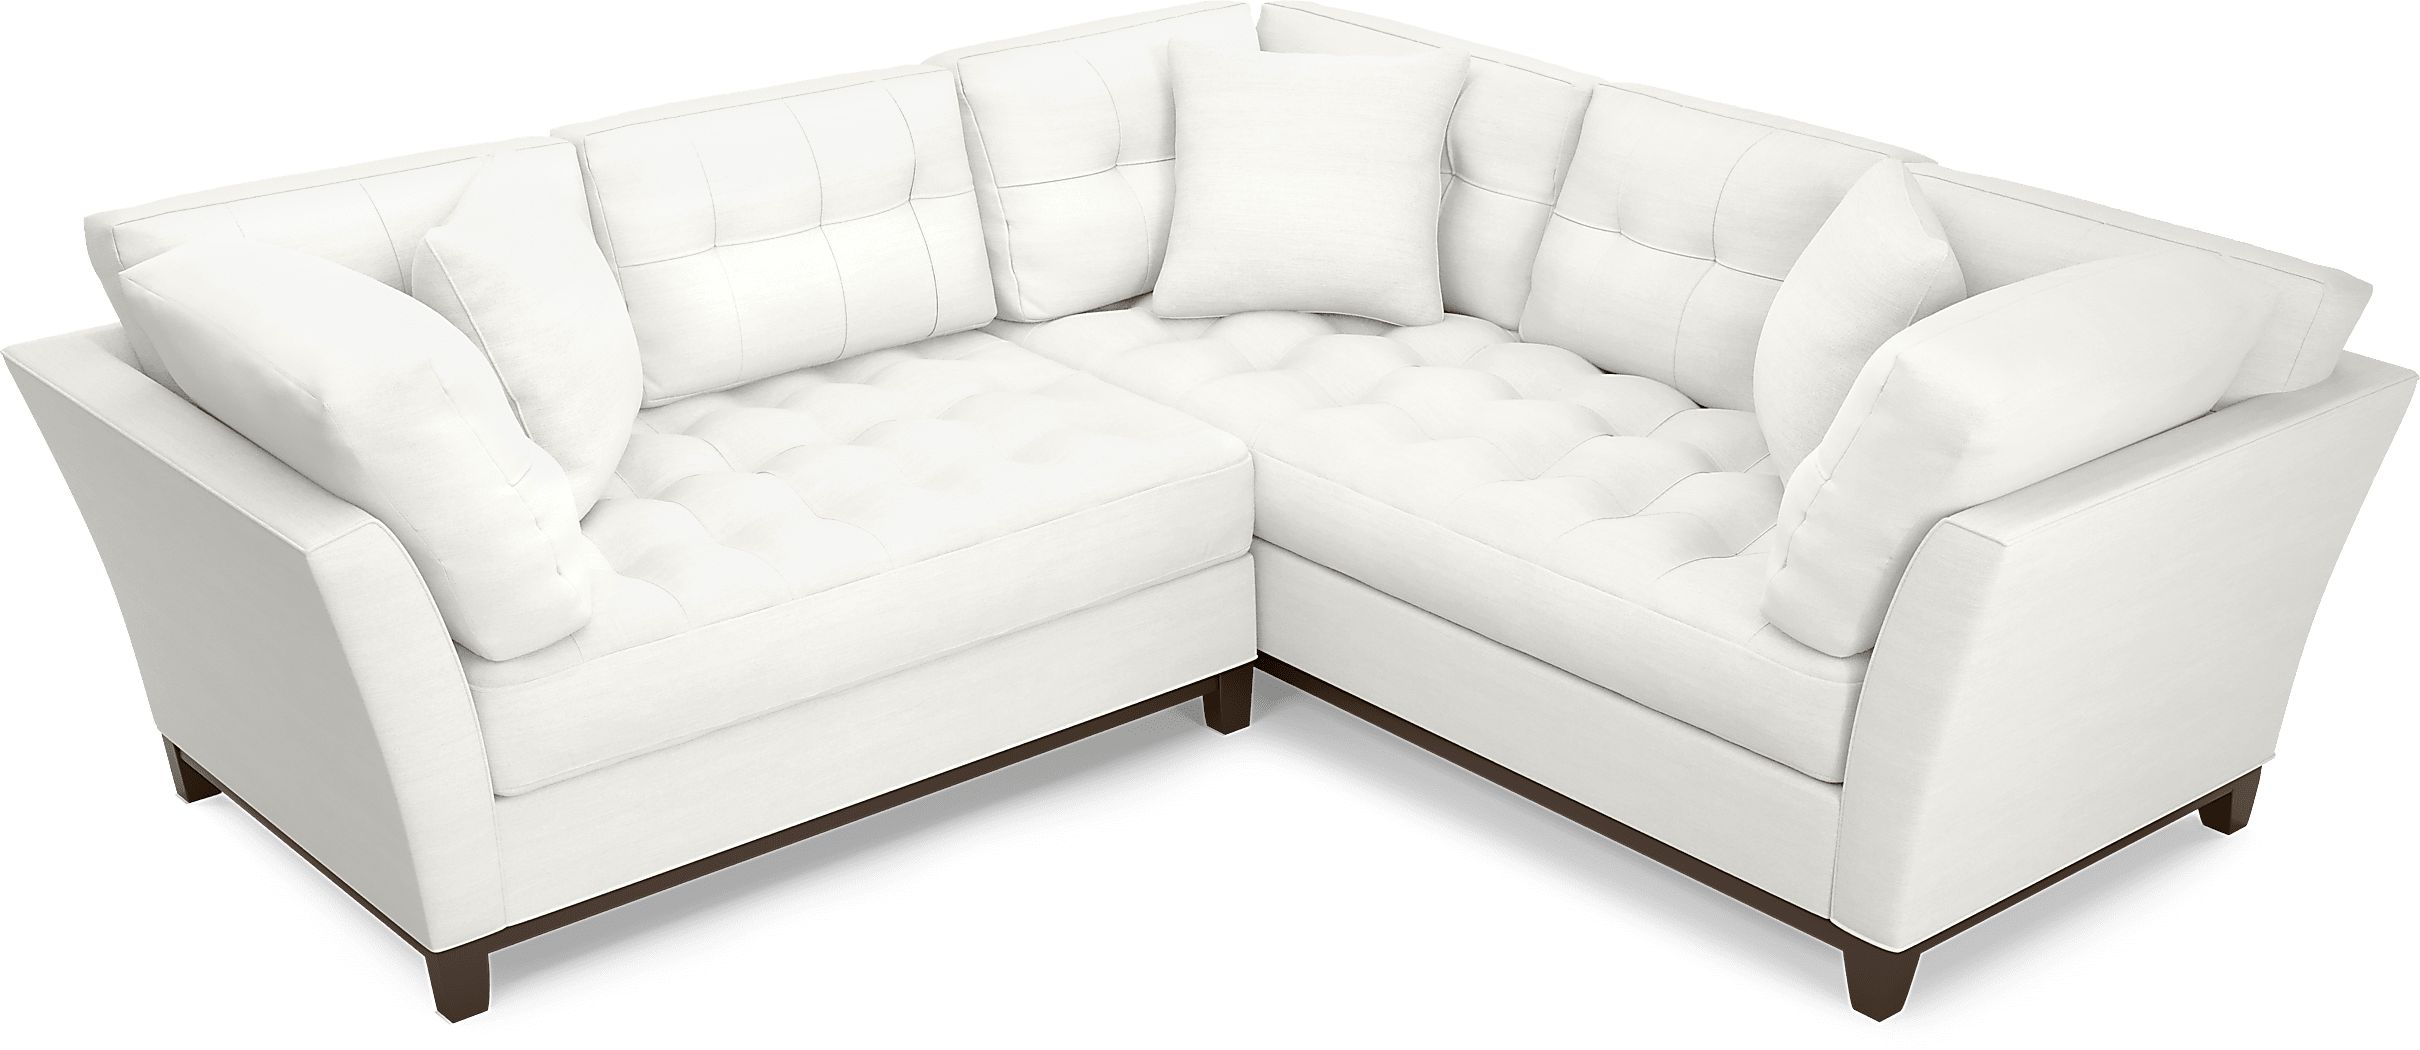 Cindy Crawford Home Metropolis Way White Textured 2 Pc Sectional